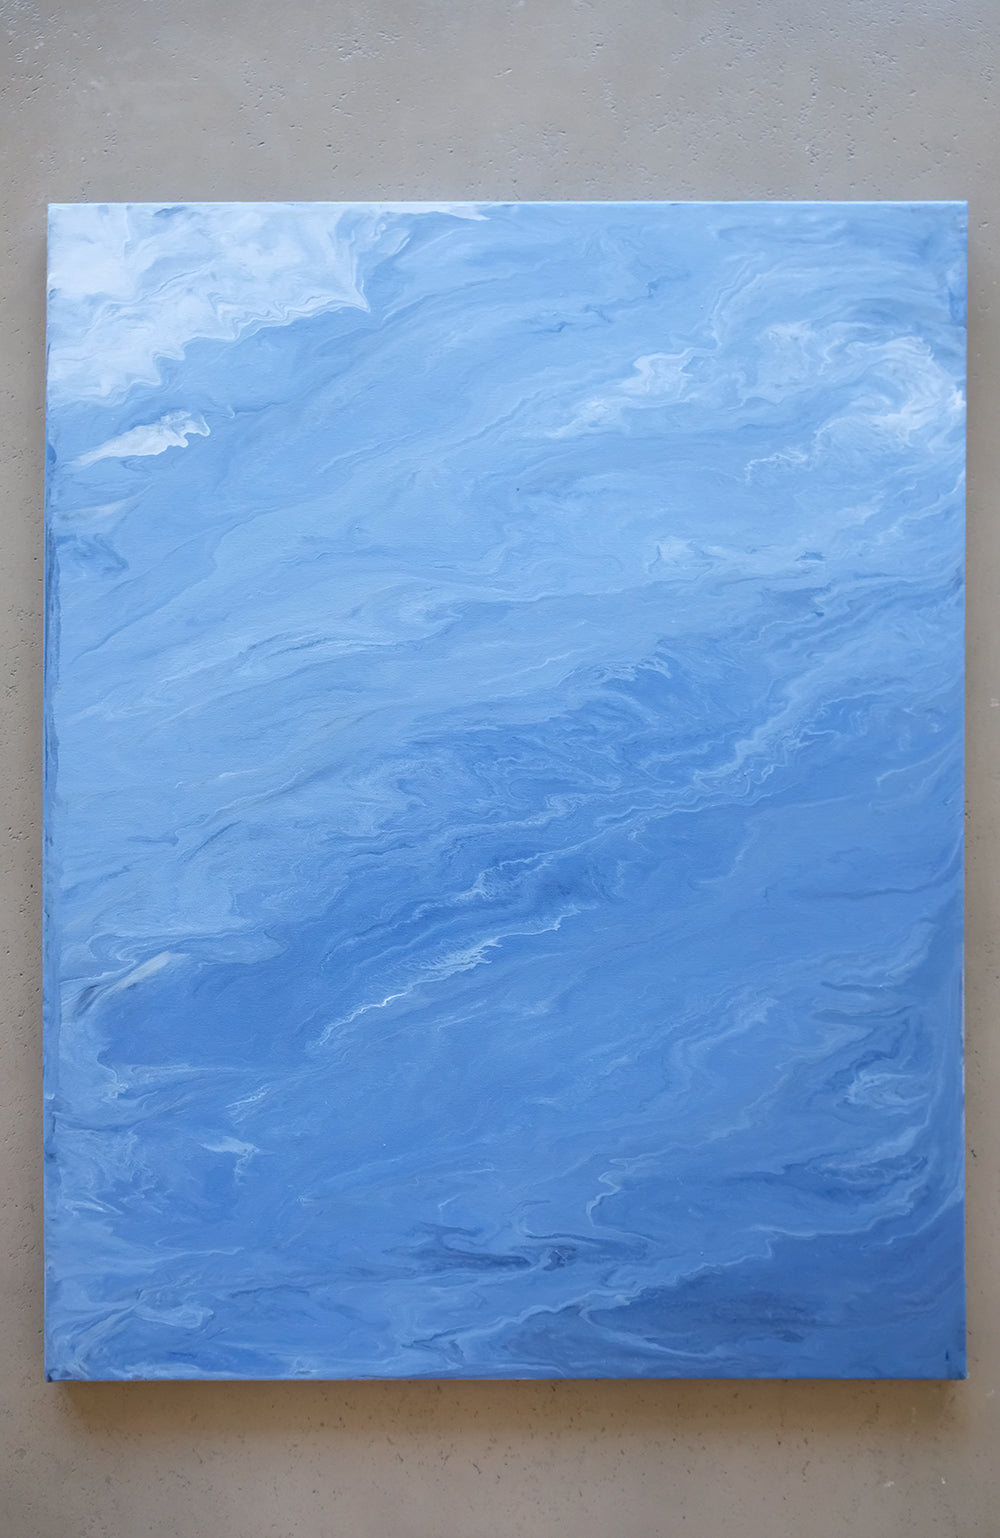 Ocean II Abstract Acrylic Painting - Original Painting 24 x 30 inches